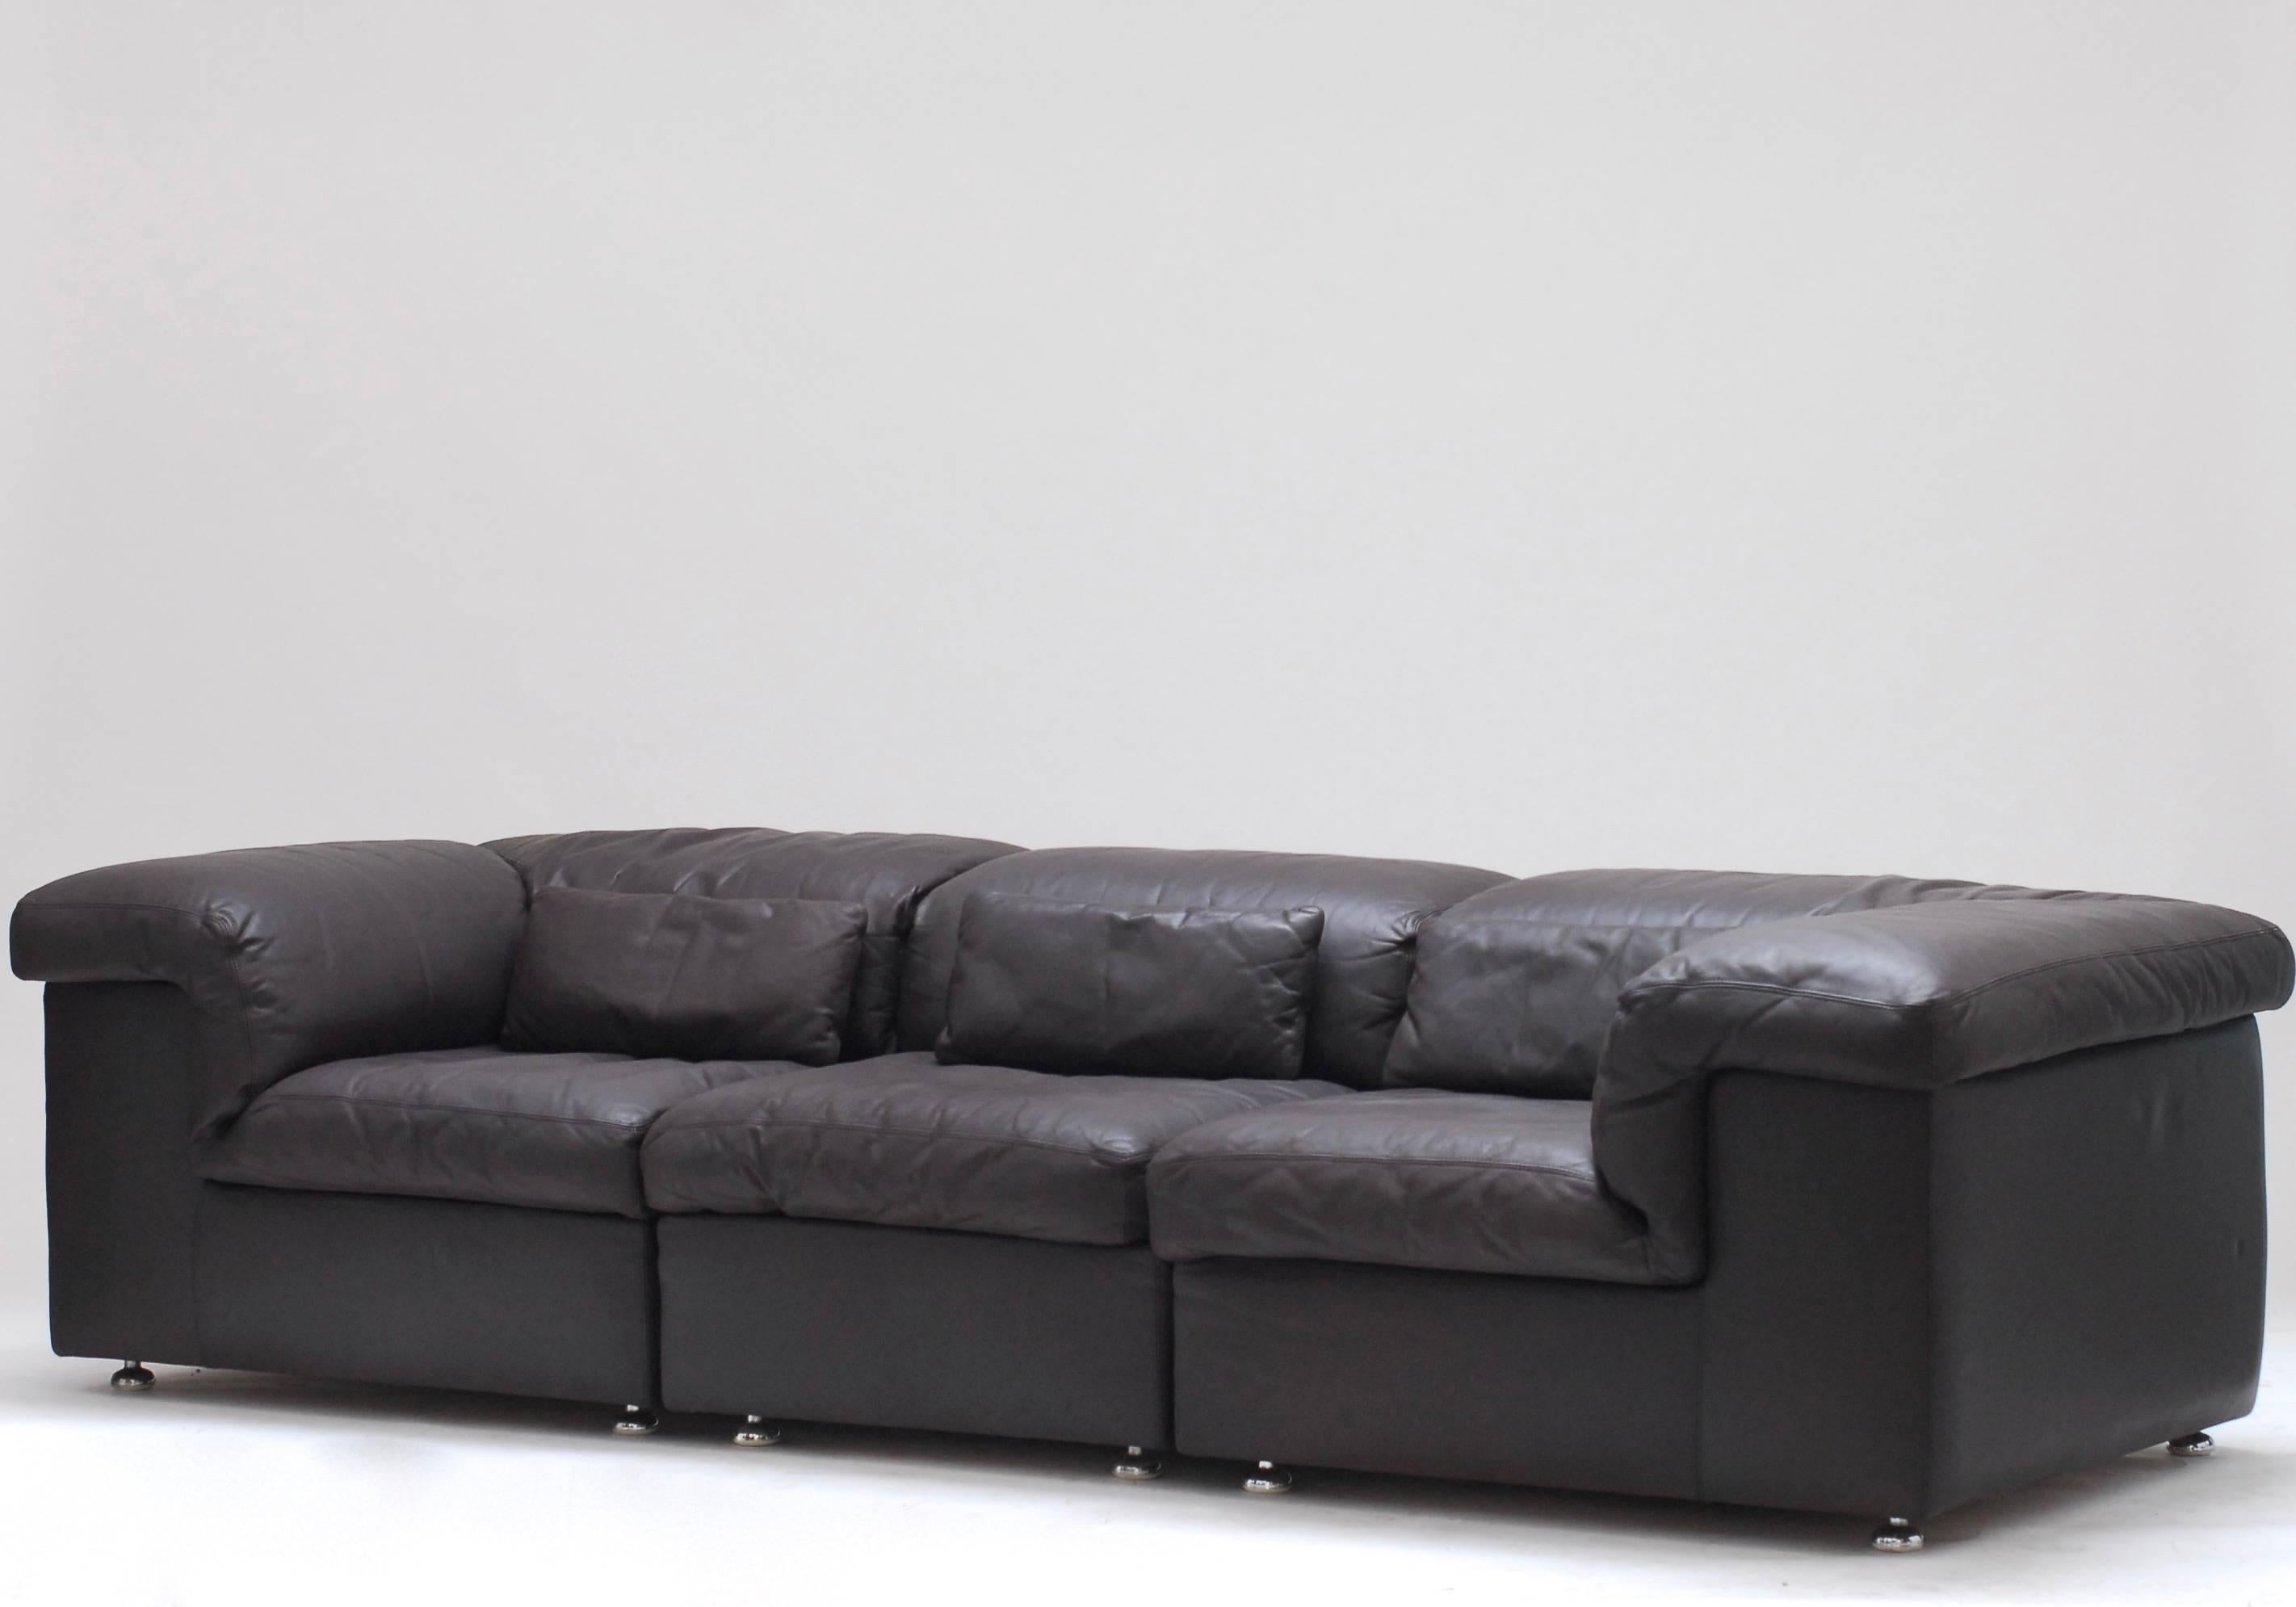 Great aniline bizon leather sofa. It has been professional cleaned and had one reparation on a cushion of 0.5cm very well done and not visible when you are not aware of it.
The sofa consists of three pieces which are put next to each other. Great